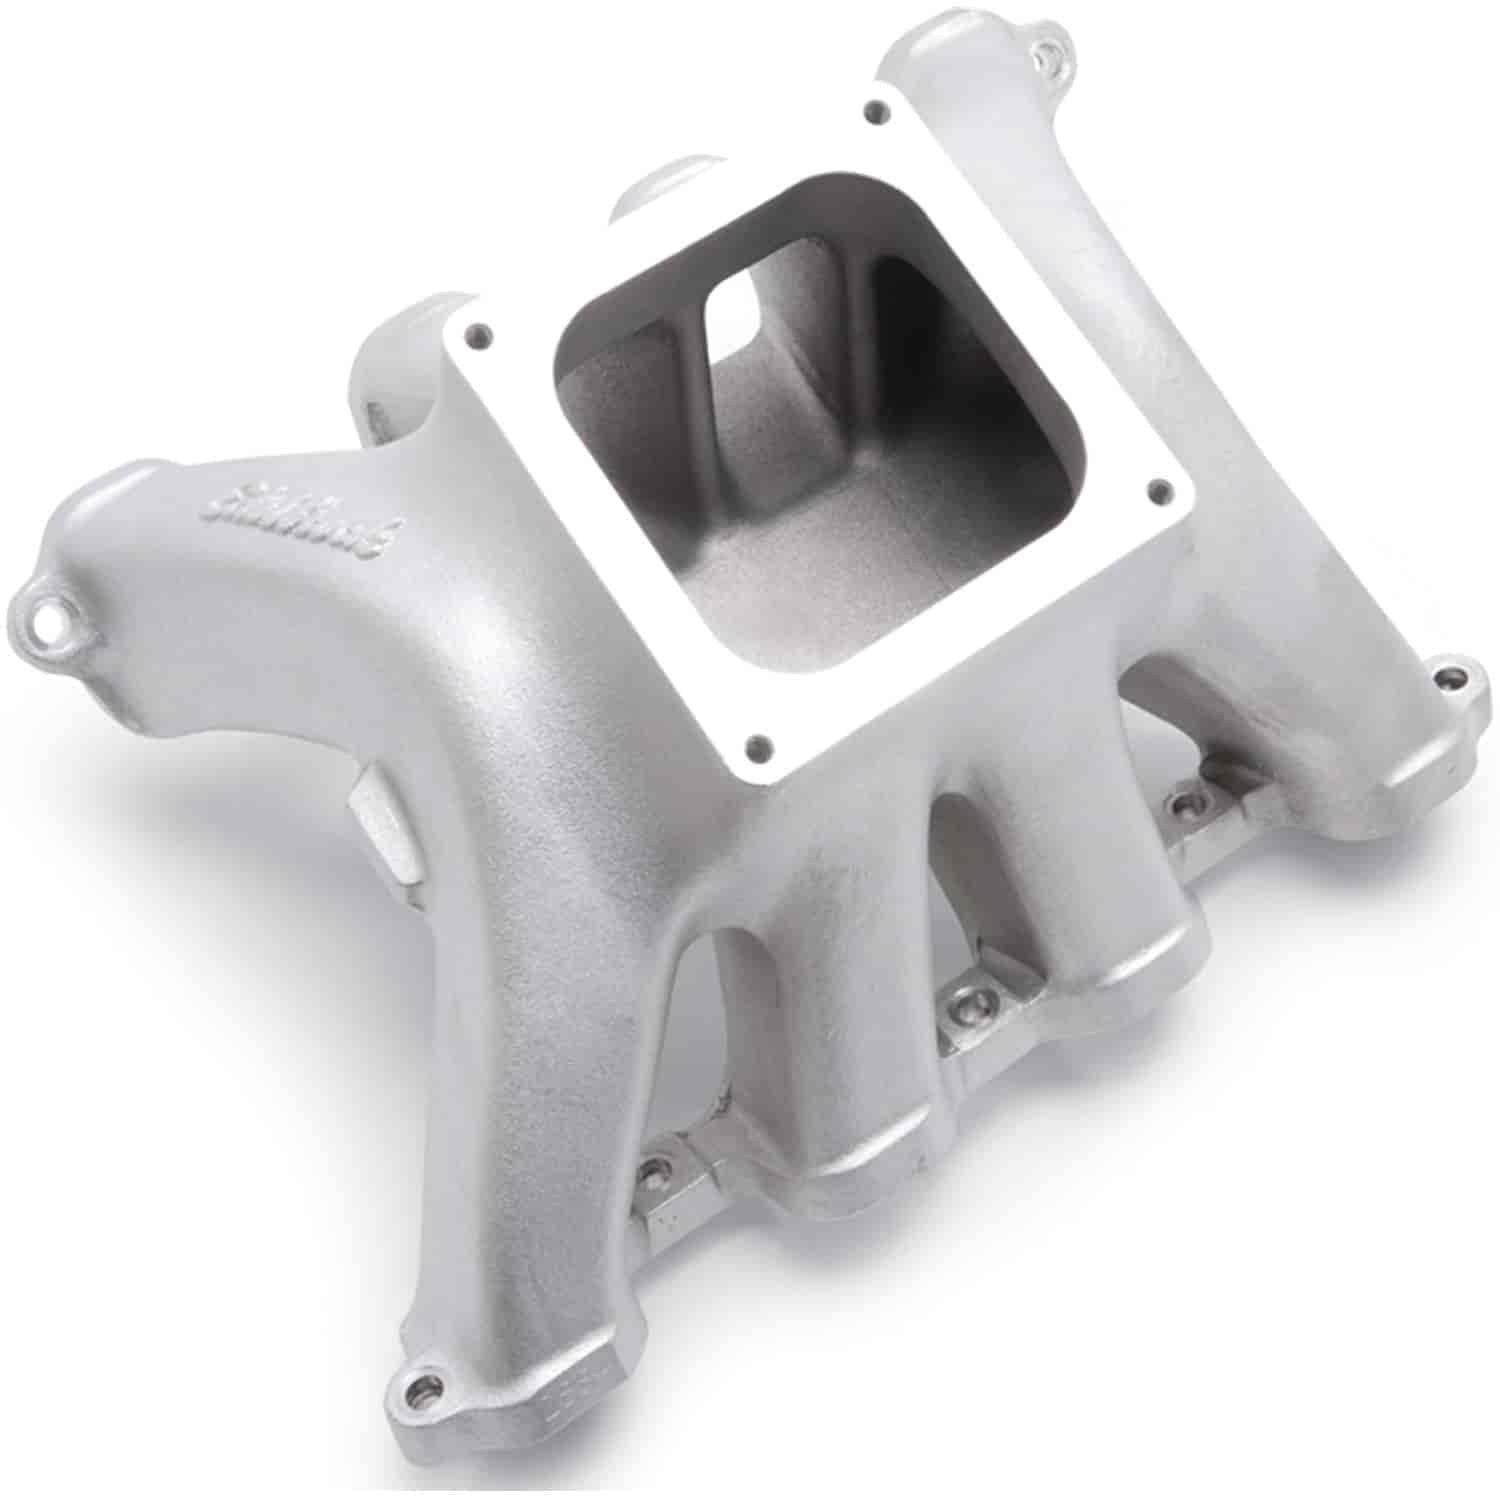 Victor SB2 Dominator Spider Intake Manifolds for Small Block Chevy